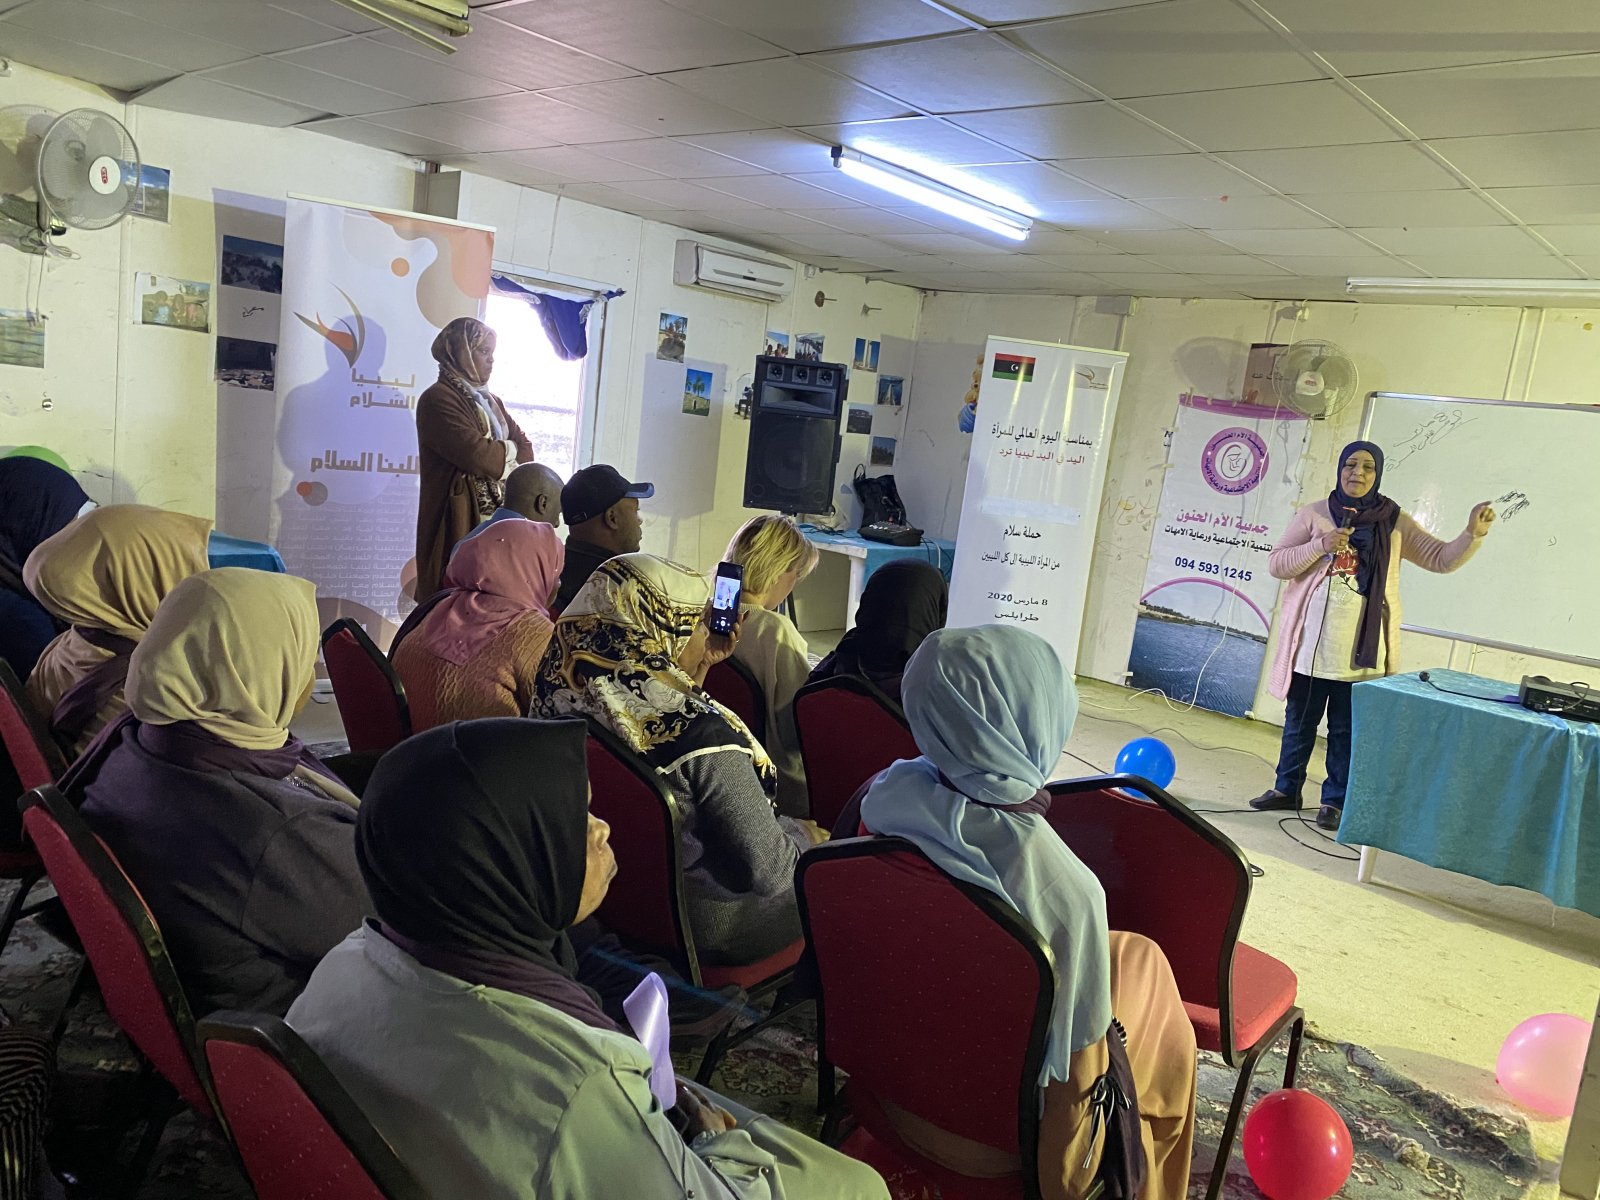 Program Spotlight: Combatting Child Marriage in Libya with the “Not-Before 18” Campaign